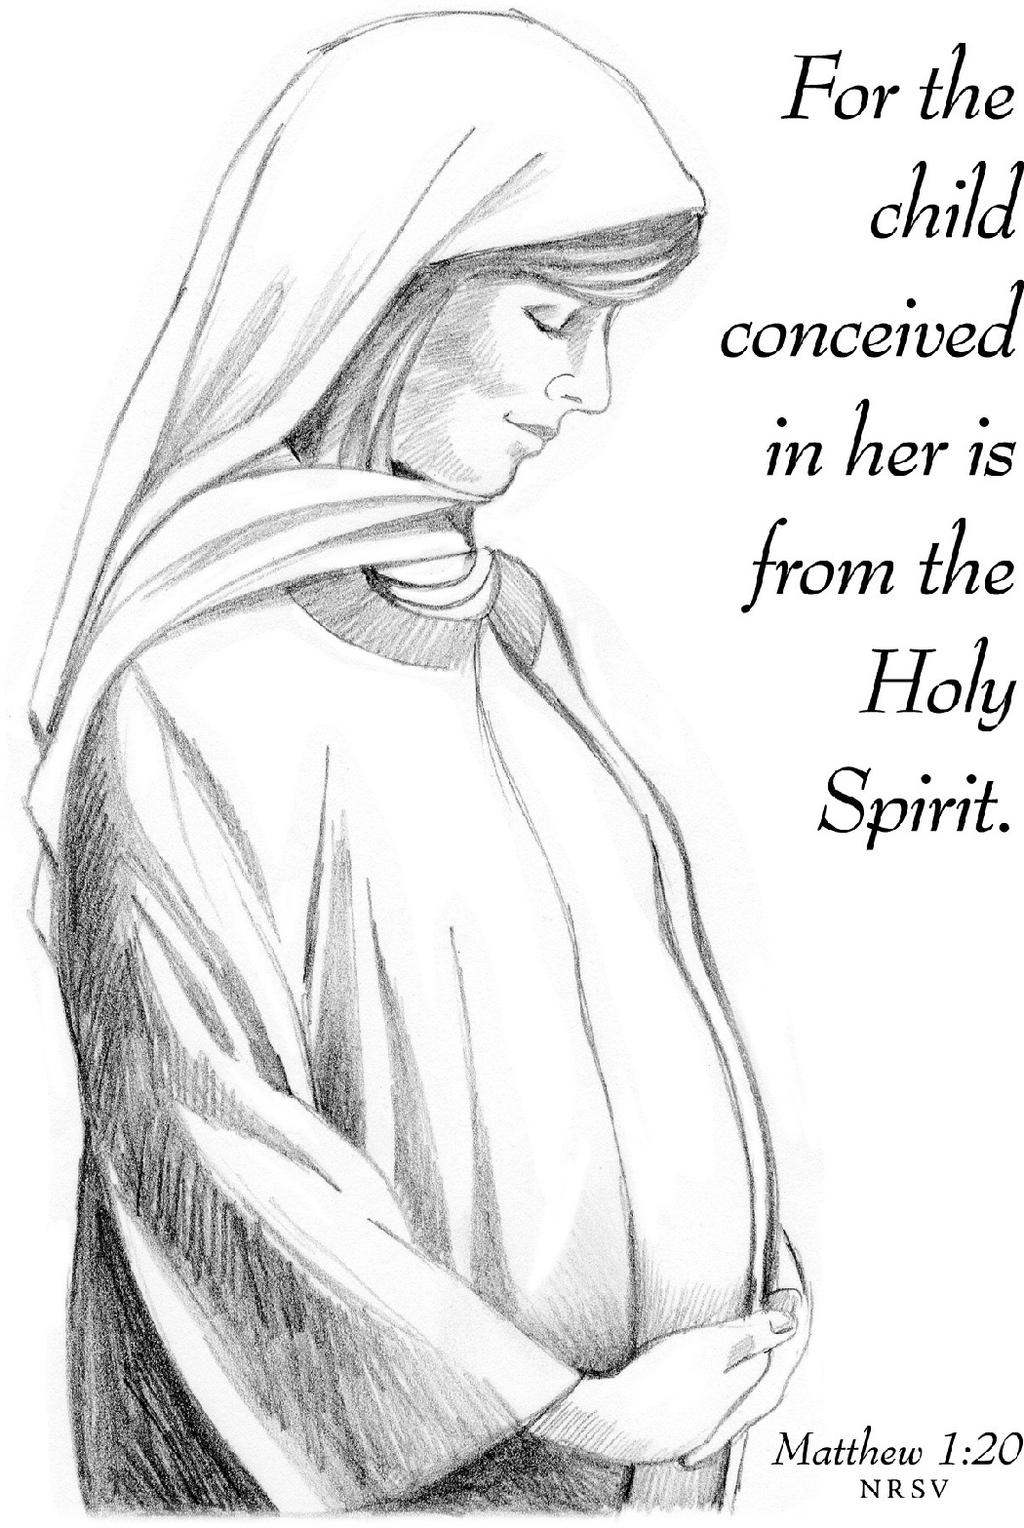 Jesus Christ Conceived By The Holy Spirit, Born Of The Virgin Mary Series: The Apostles Creed [#4] Selected Scriptures Pastor Lyle L.